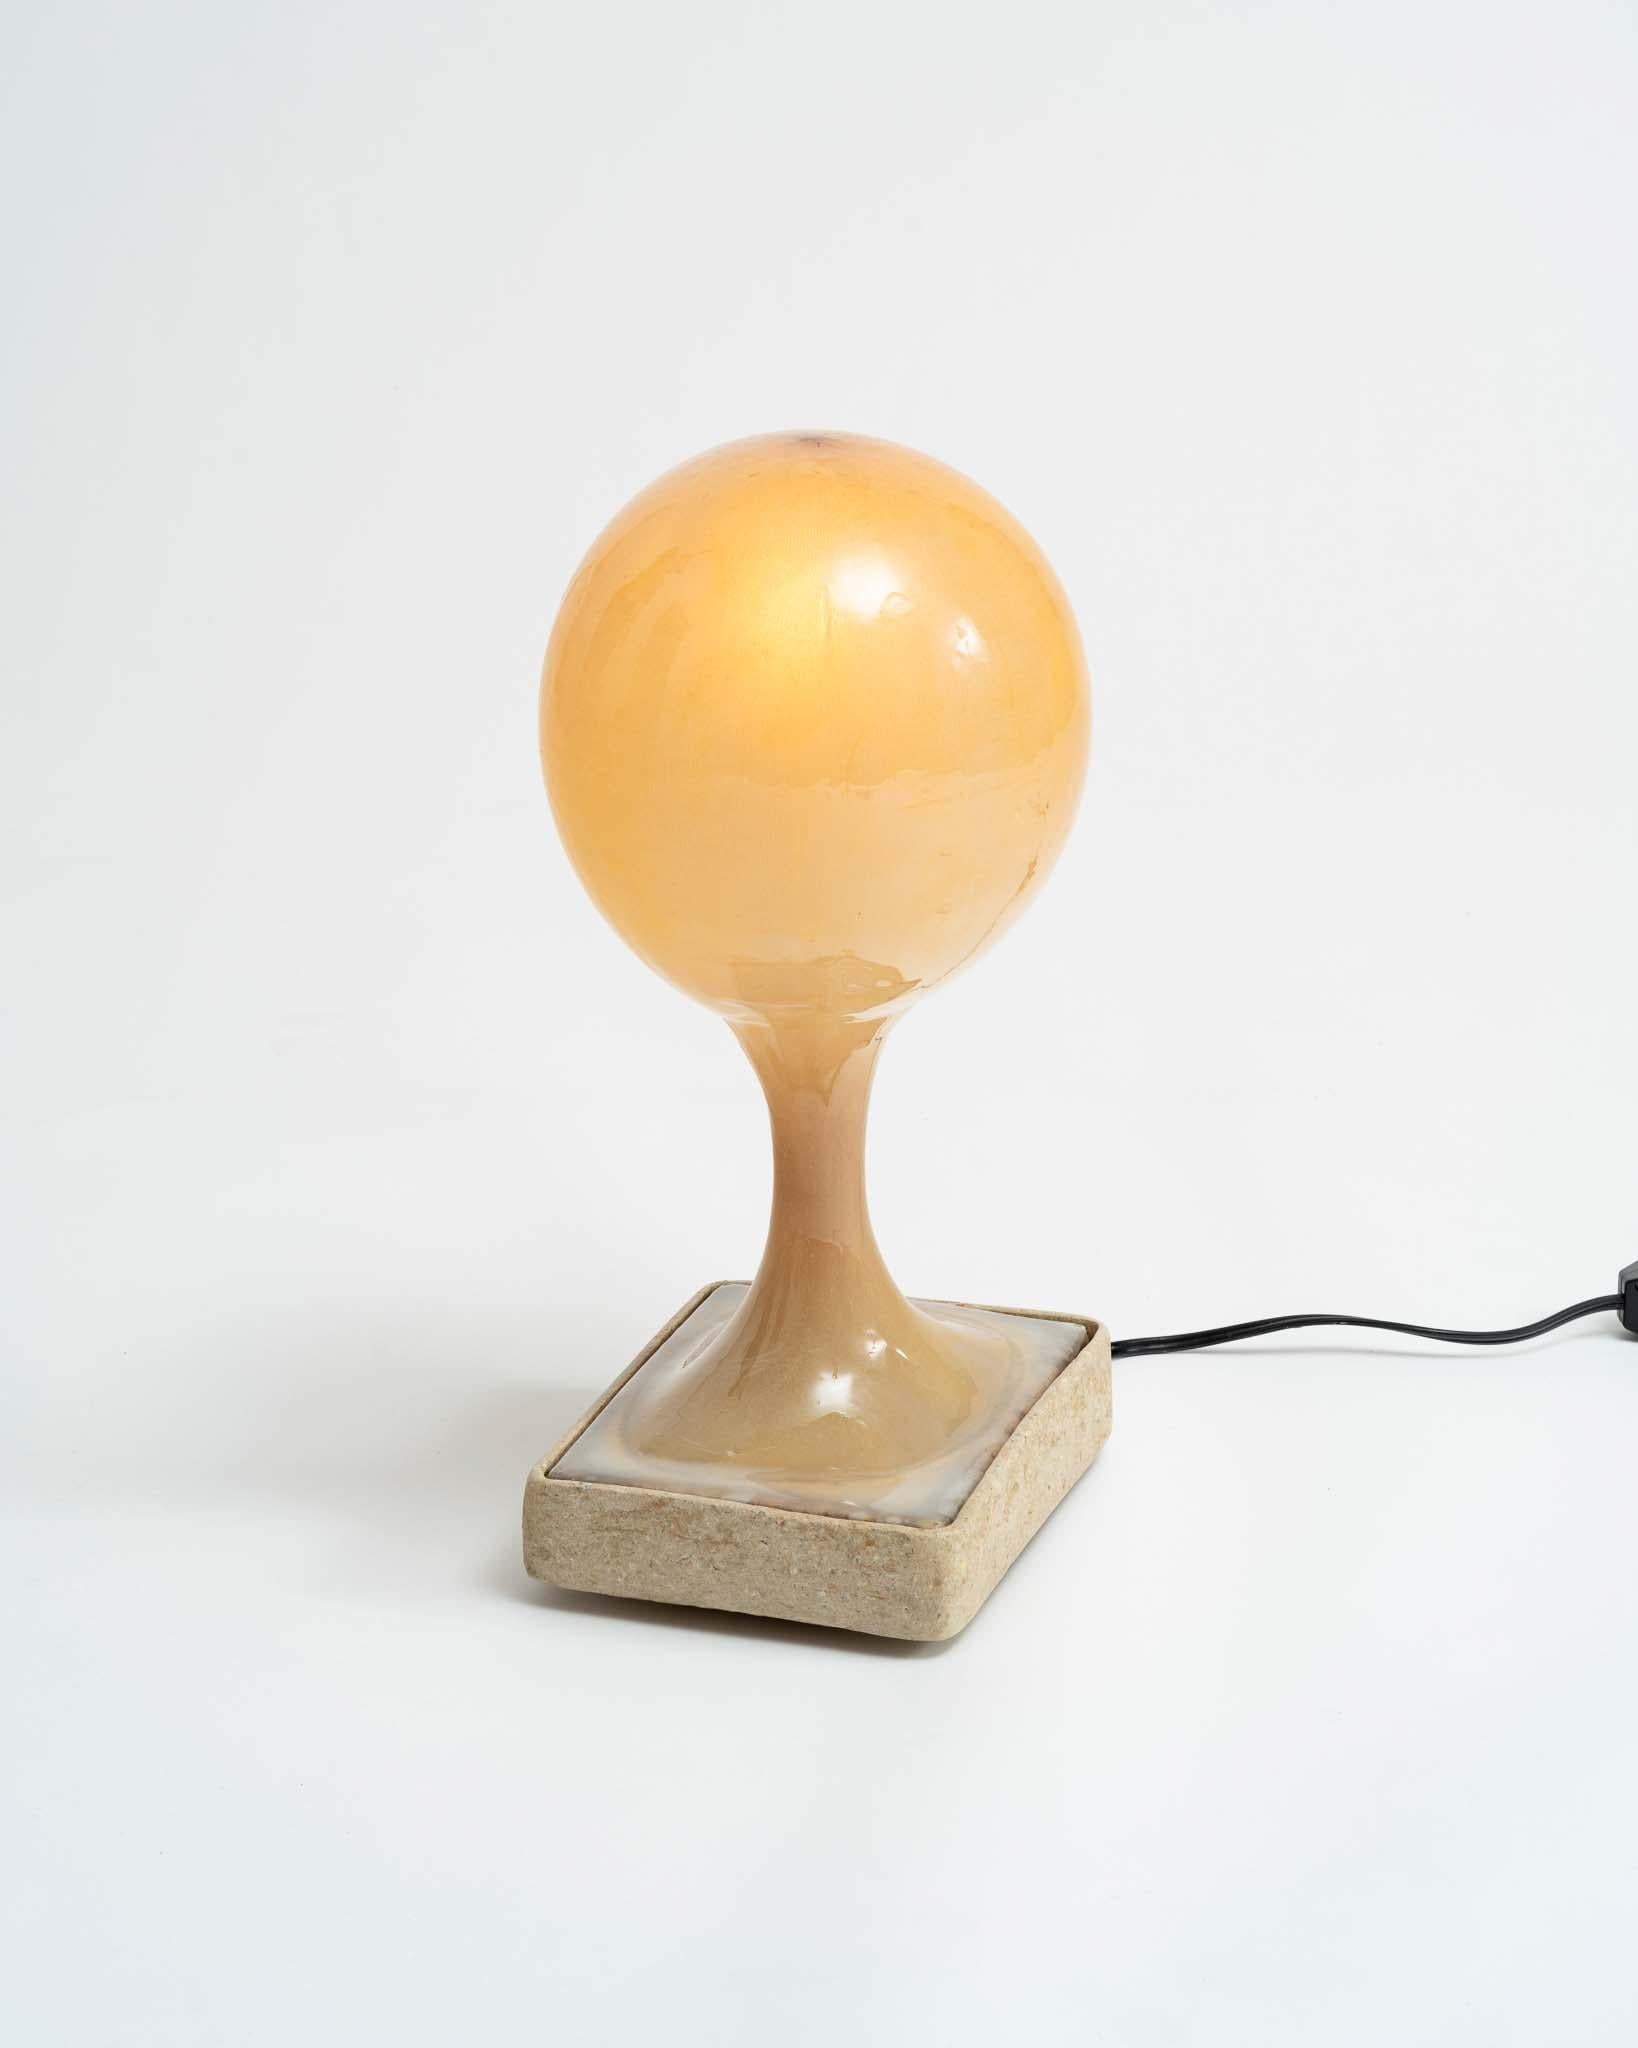 Contemporary hand-crafted, sculptural one-of-a-kind resin and organic fiber table lamp by American designer James Cherry.

The piece is made of various upcycled materials, including base-blended natural fiber pulp, coconut husks, wood, fabric and